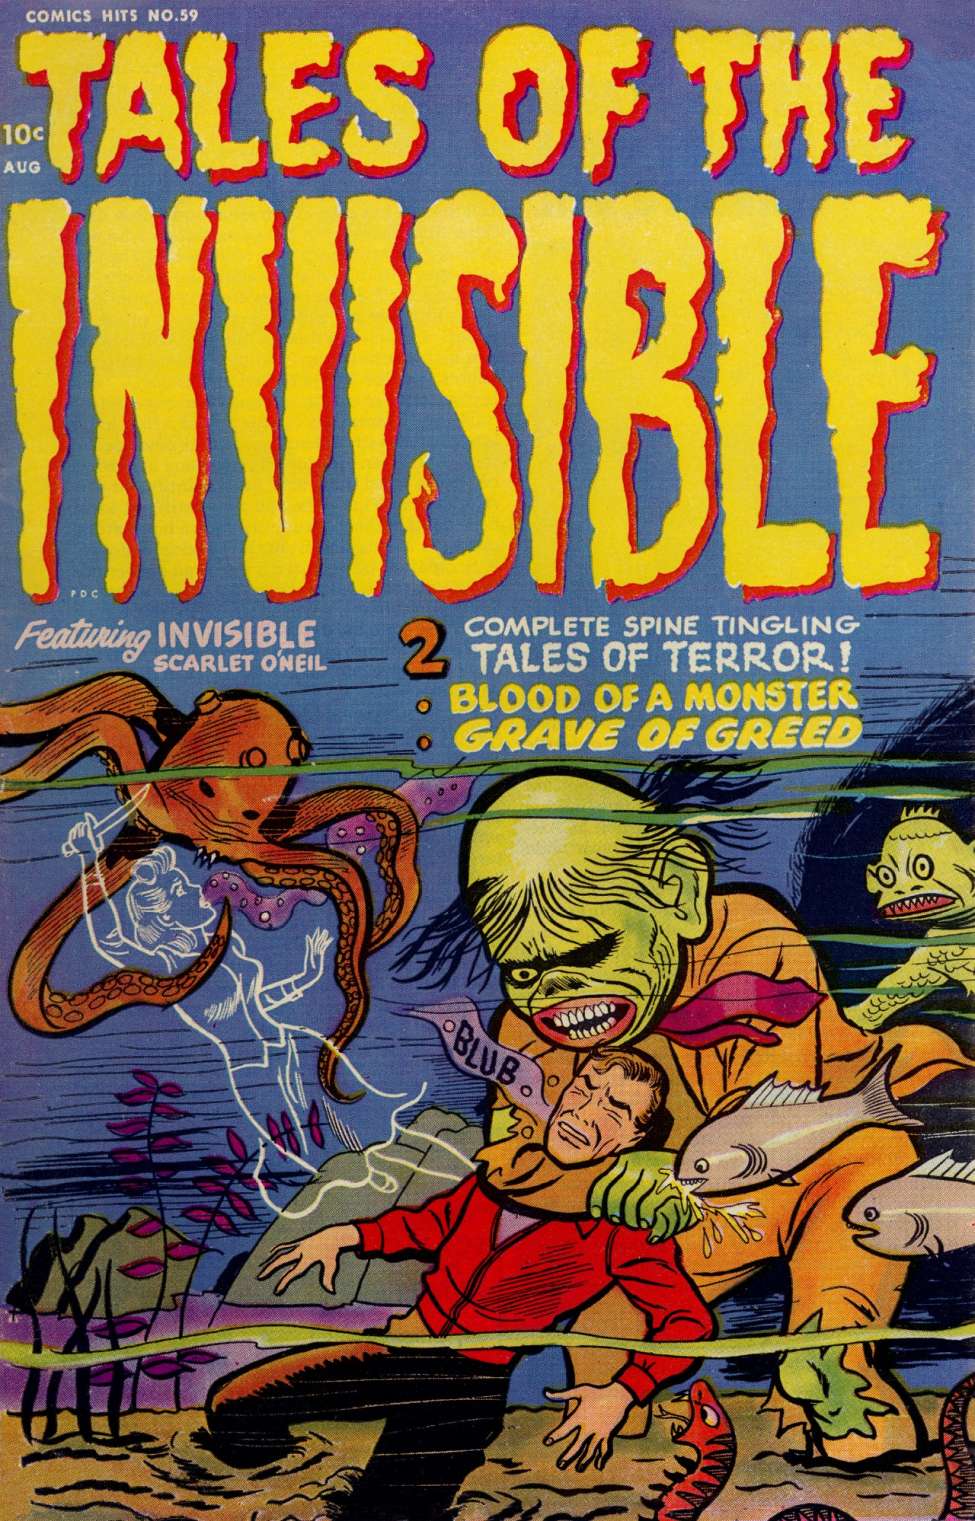 Comic Book Cover For Harvey Comics Hits 59 - Tales Of The Invisible